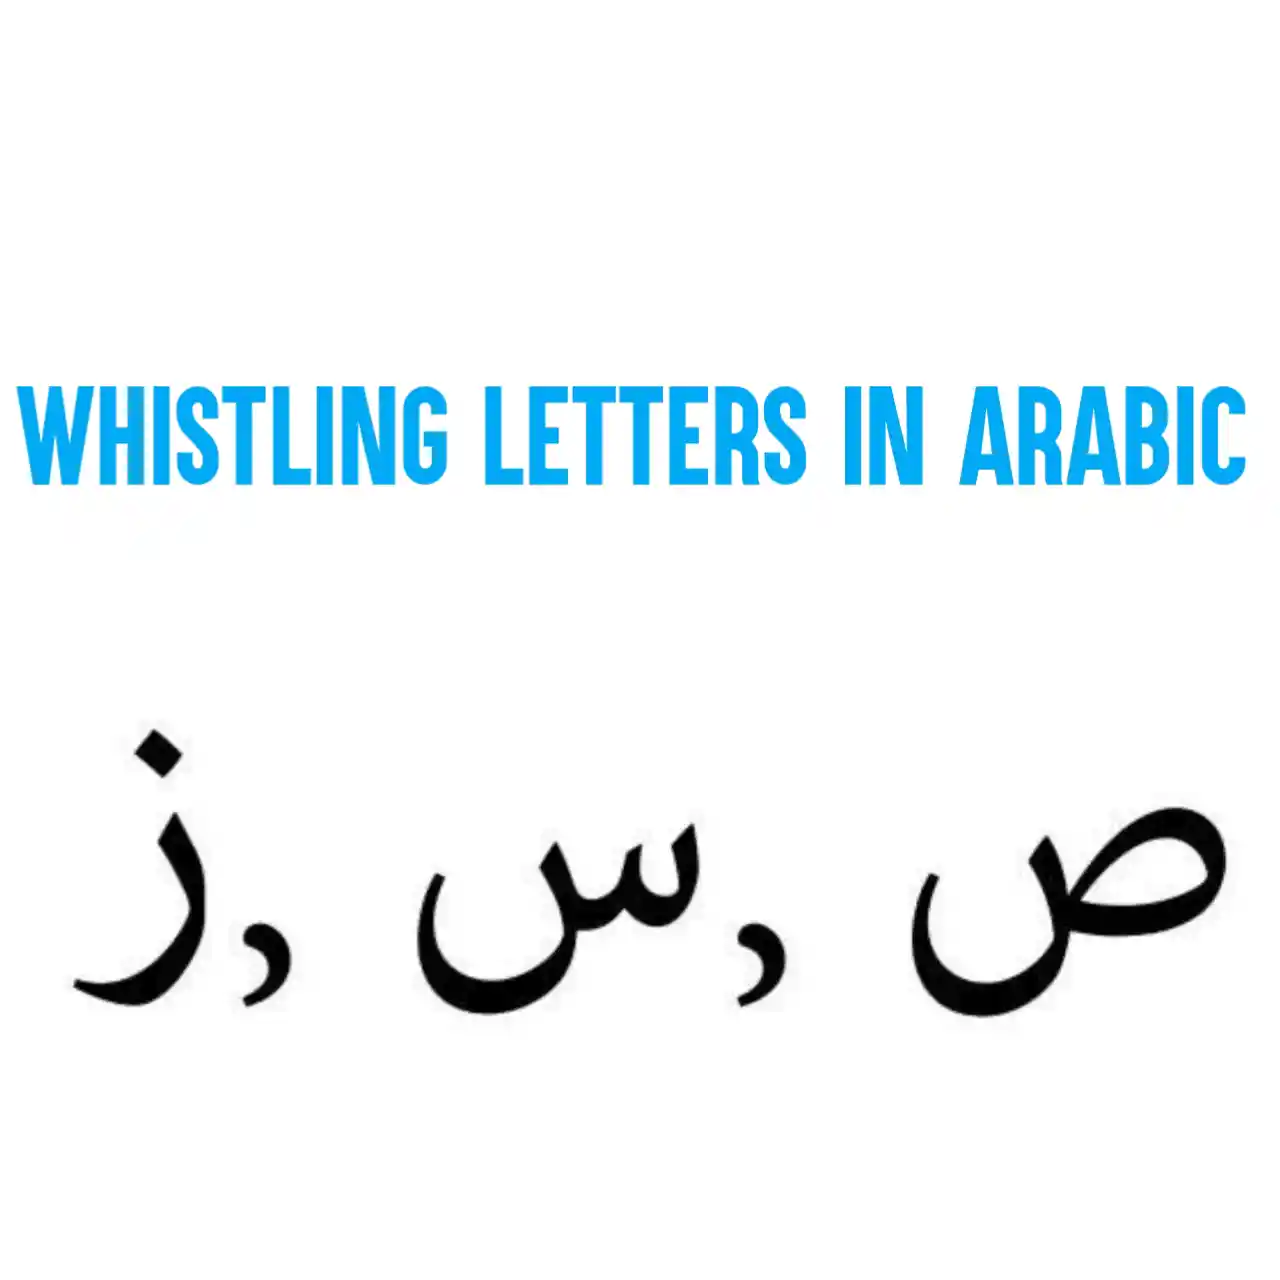 Whistling Letters In Arabic